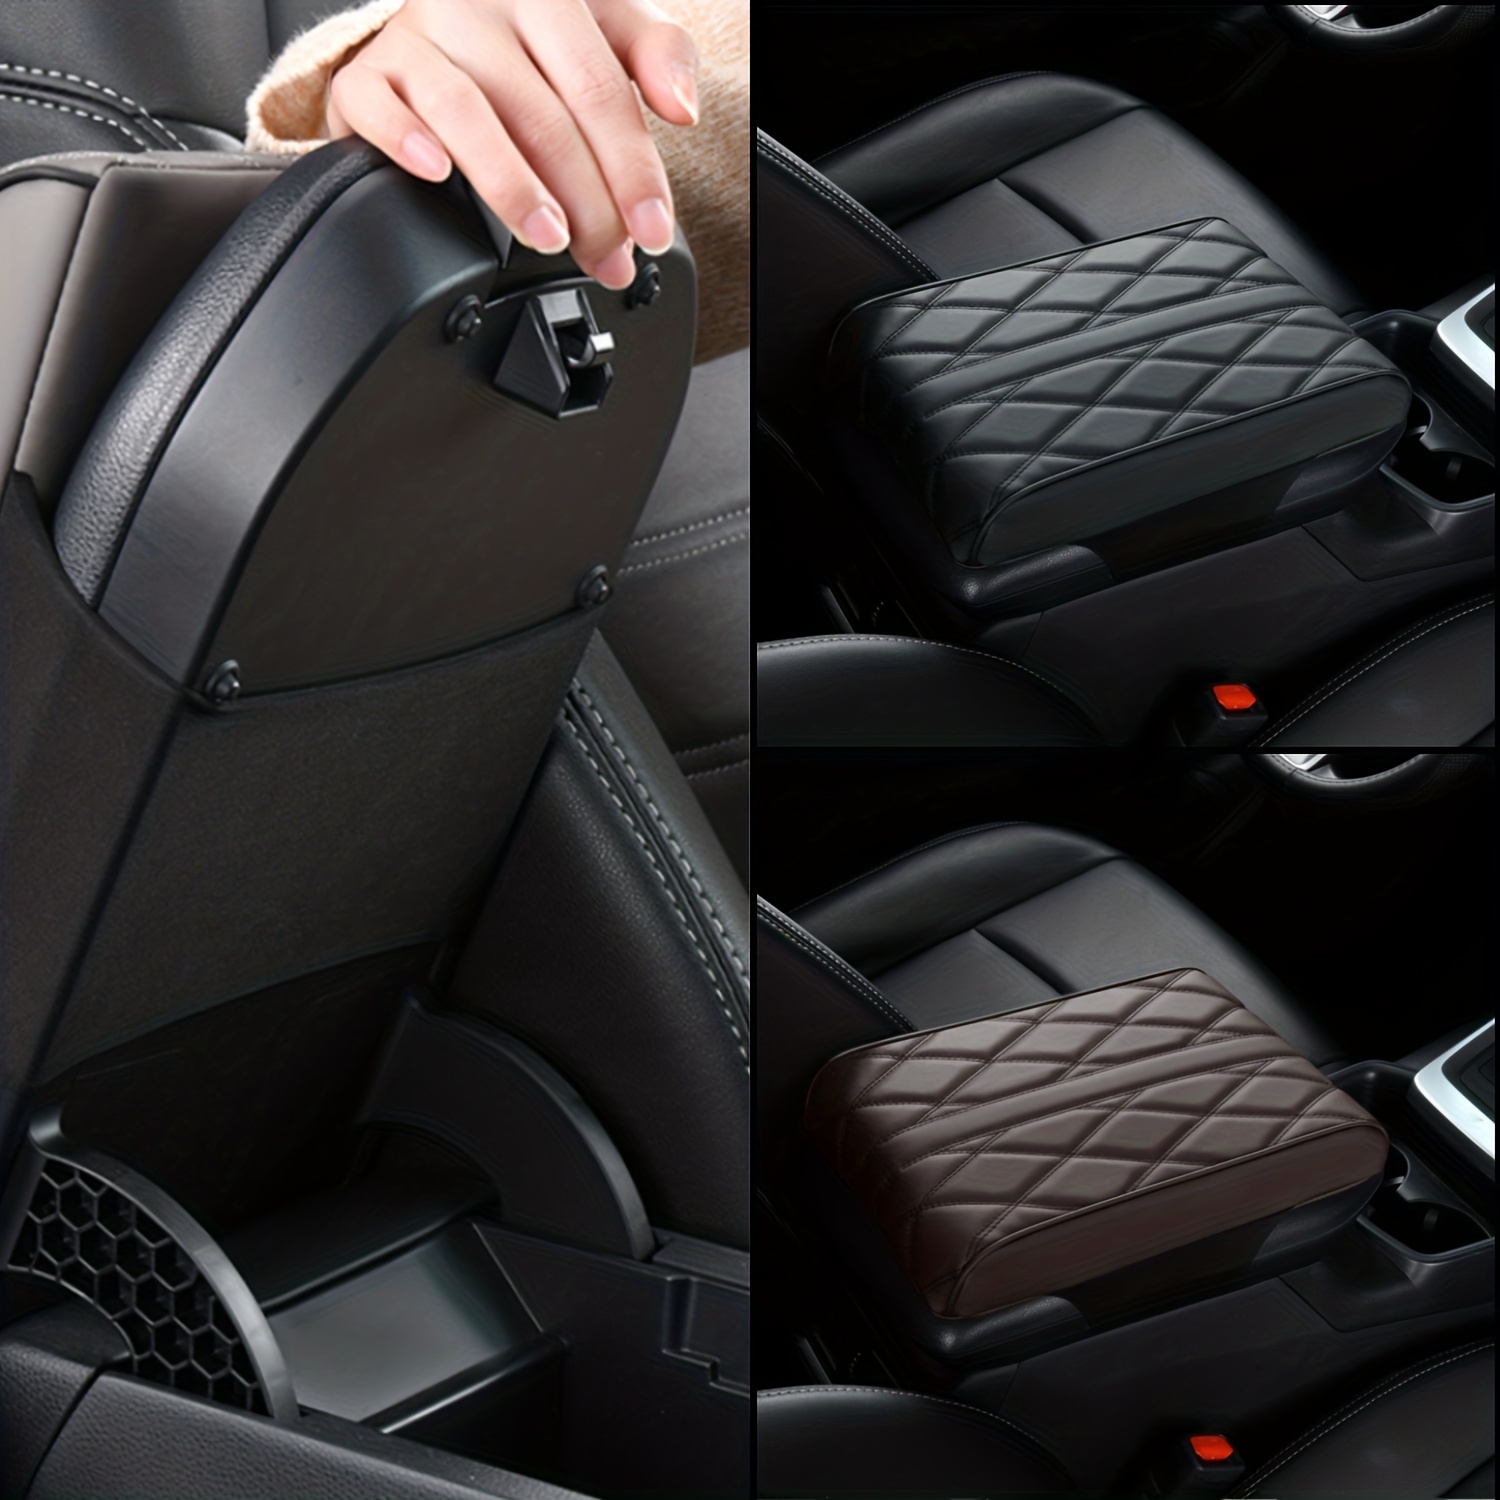  Leather Car Armrest Box Pad - 2023 New Waterproof Car Center  Console Cover Pad, Leather Auto Armrest Cover, Universal Arm Rest Cushion  Pads for SUV/Truck/Vehicle (B - Coffee) : Automotive